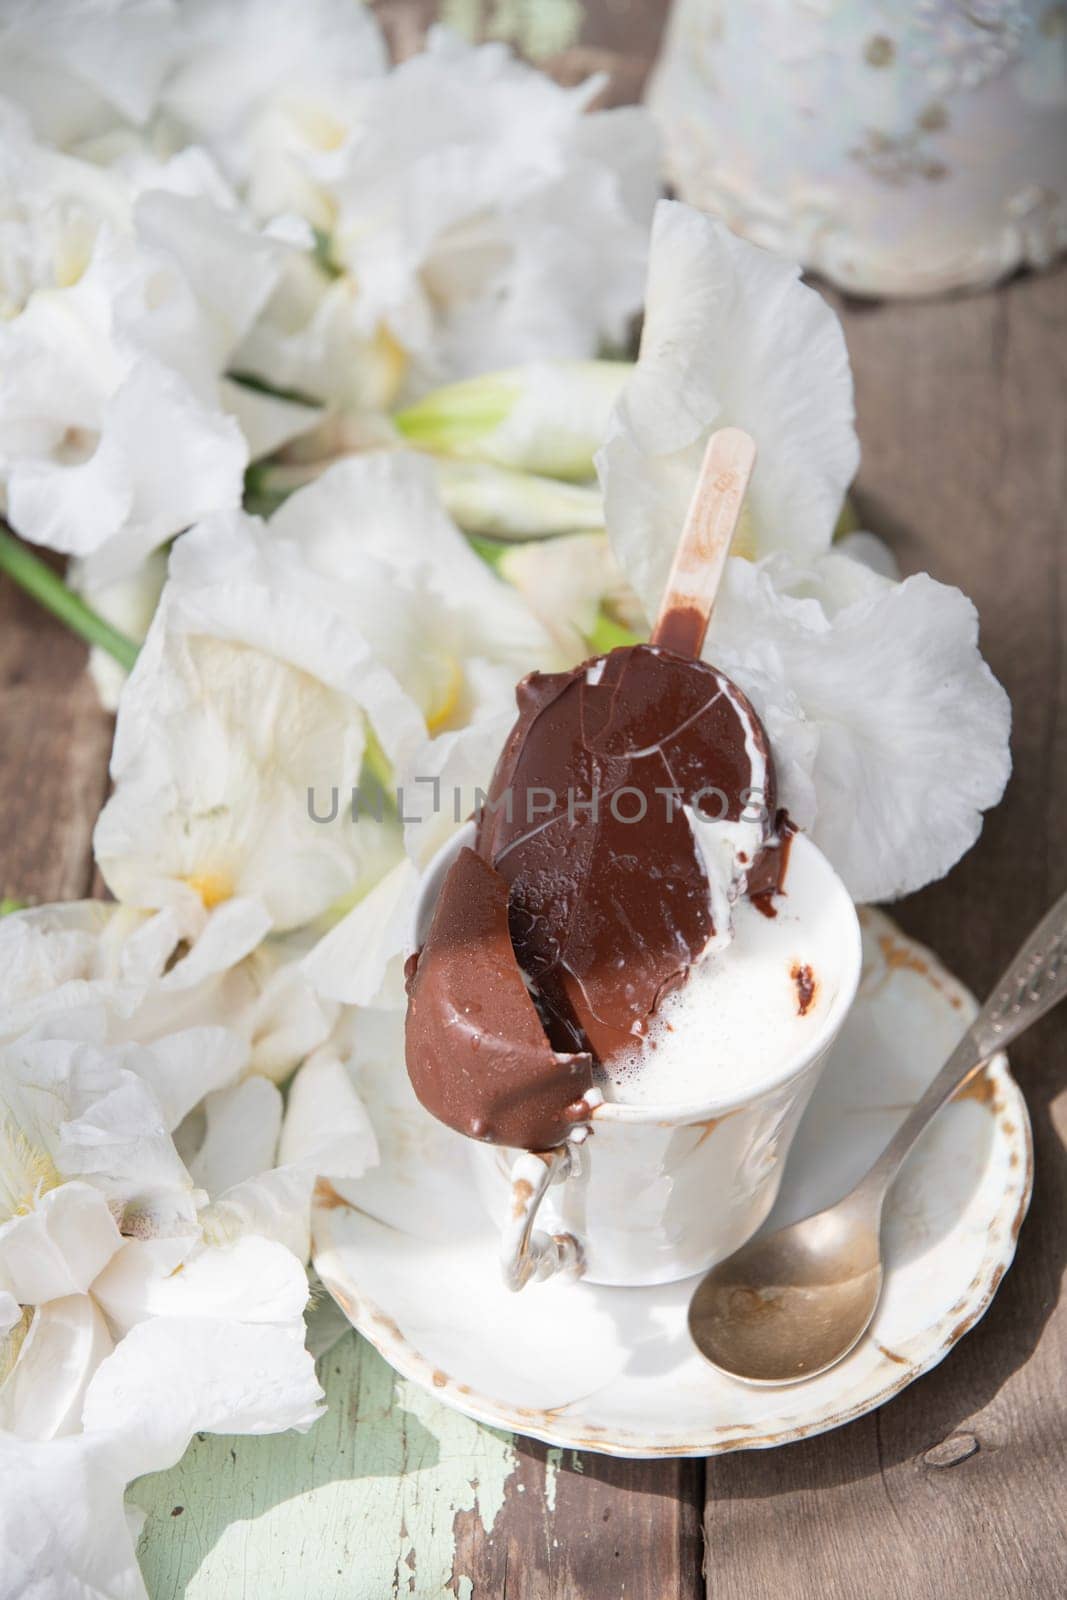 melted chocolate ice cream in a cup of coffee, spring still life with a bouquet of white irises, antique porcelain tableware, romantic break for dessert, top view, high quality photo